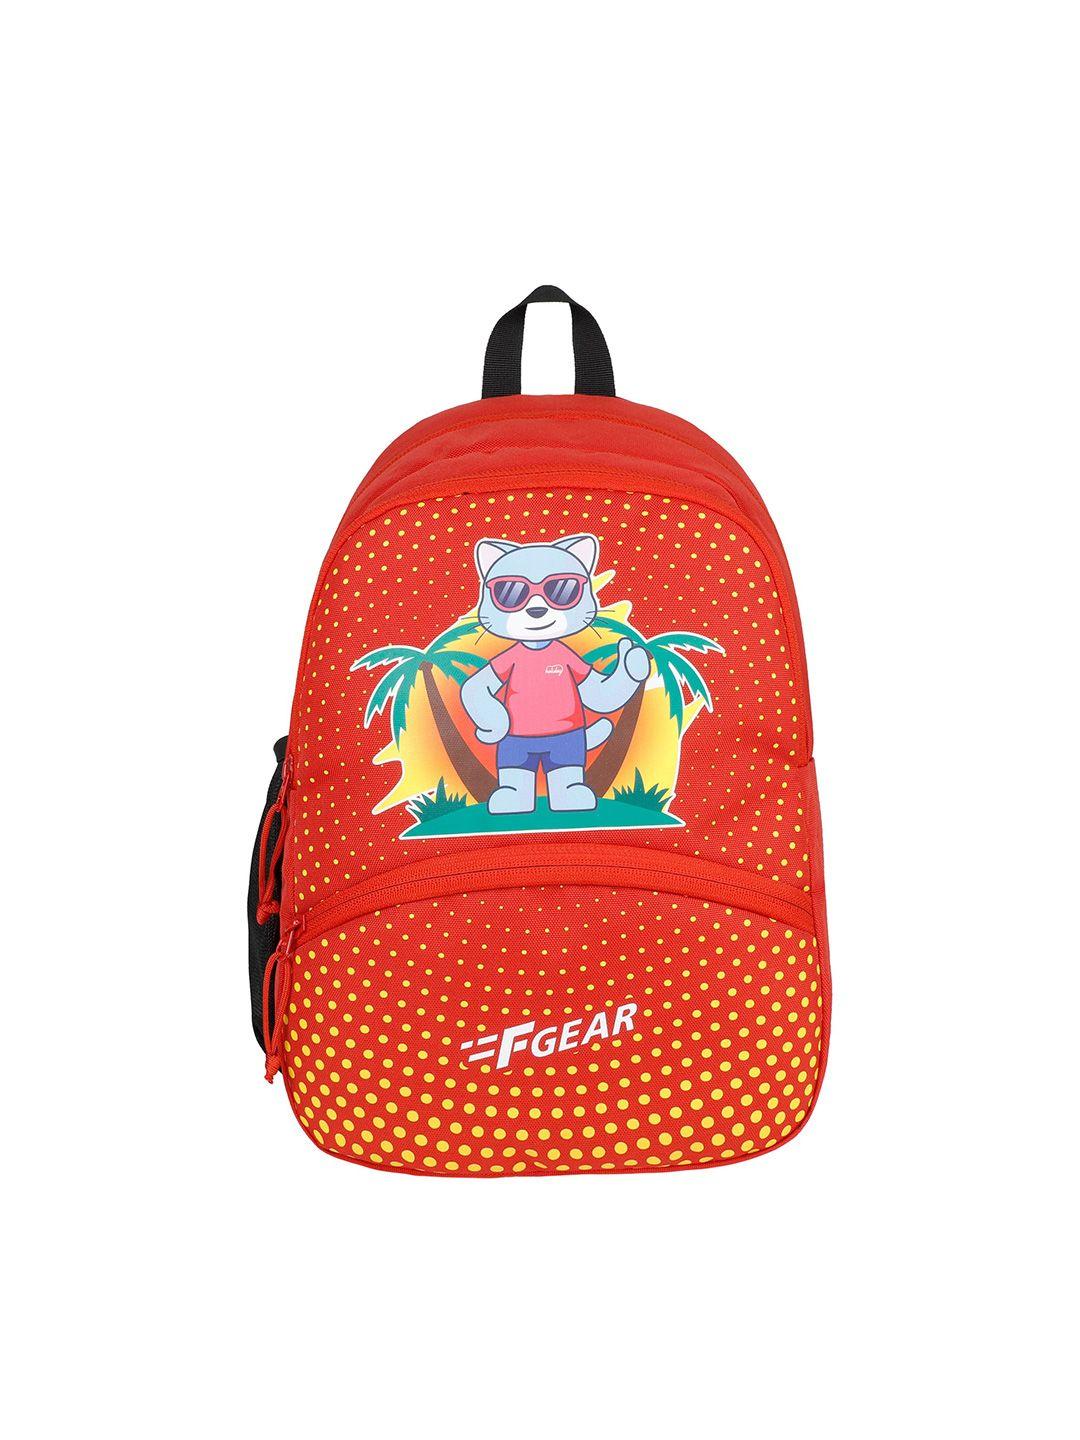 f gear kids tom graphic backpack with compression straps